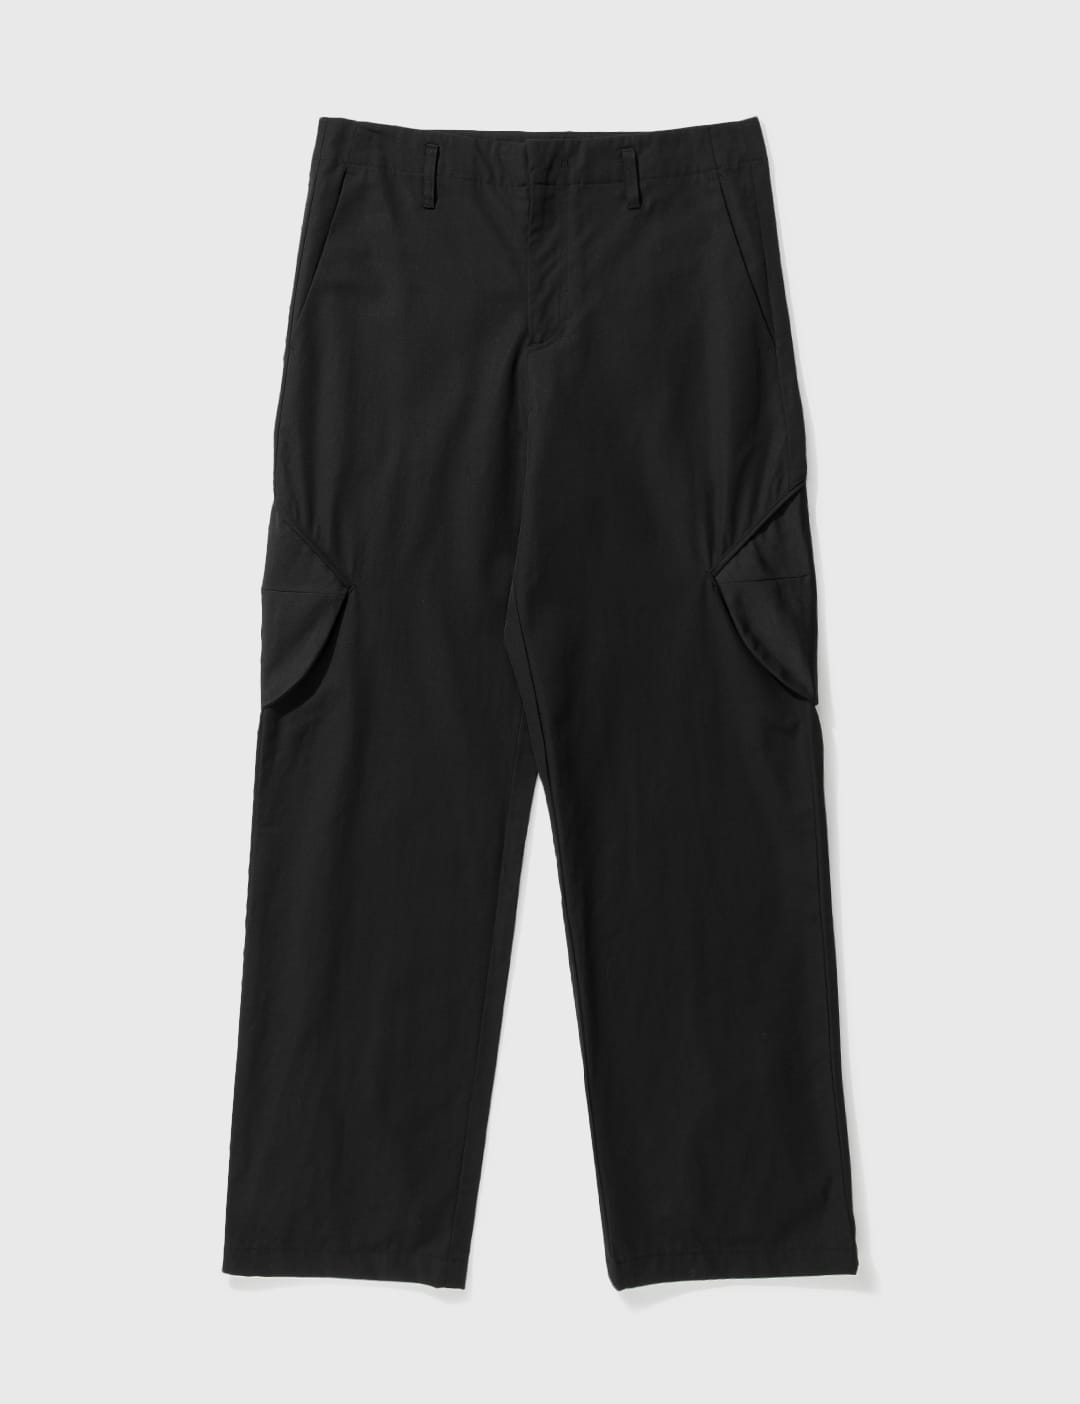 POST ARCHIVE FACTION (PAF) 5.0 TROUSERS CENTER